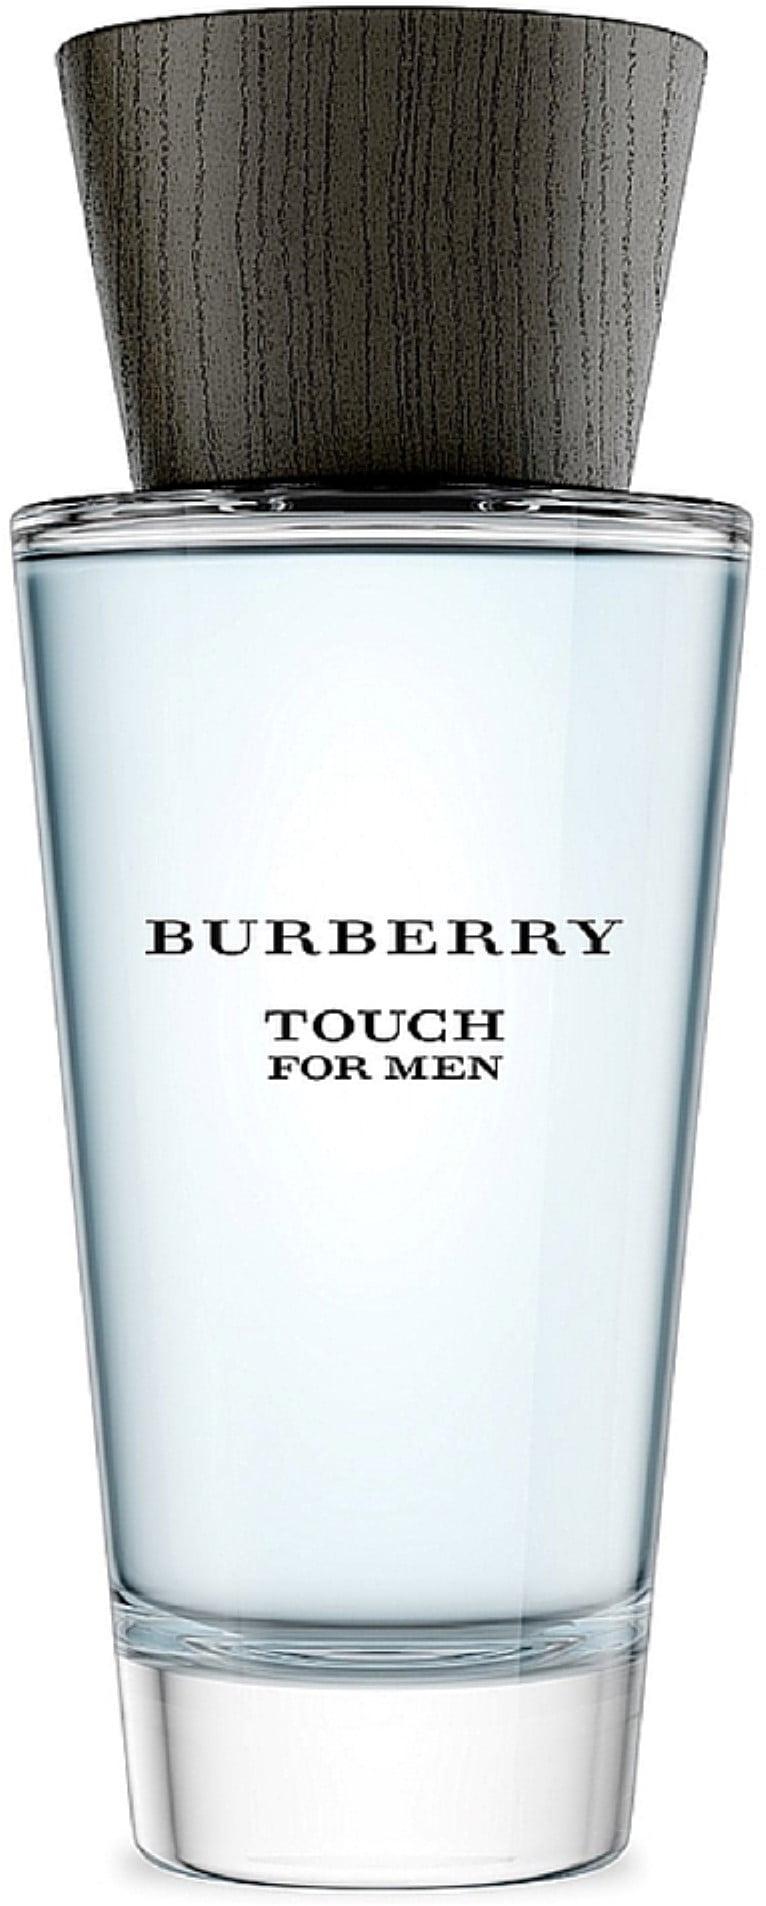 boots burberry touch